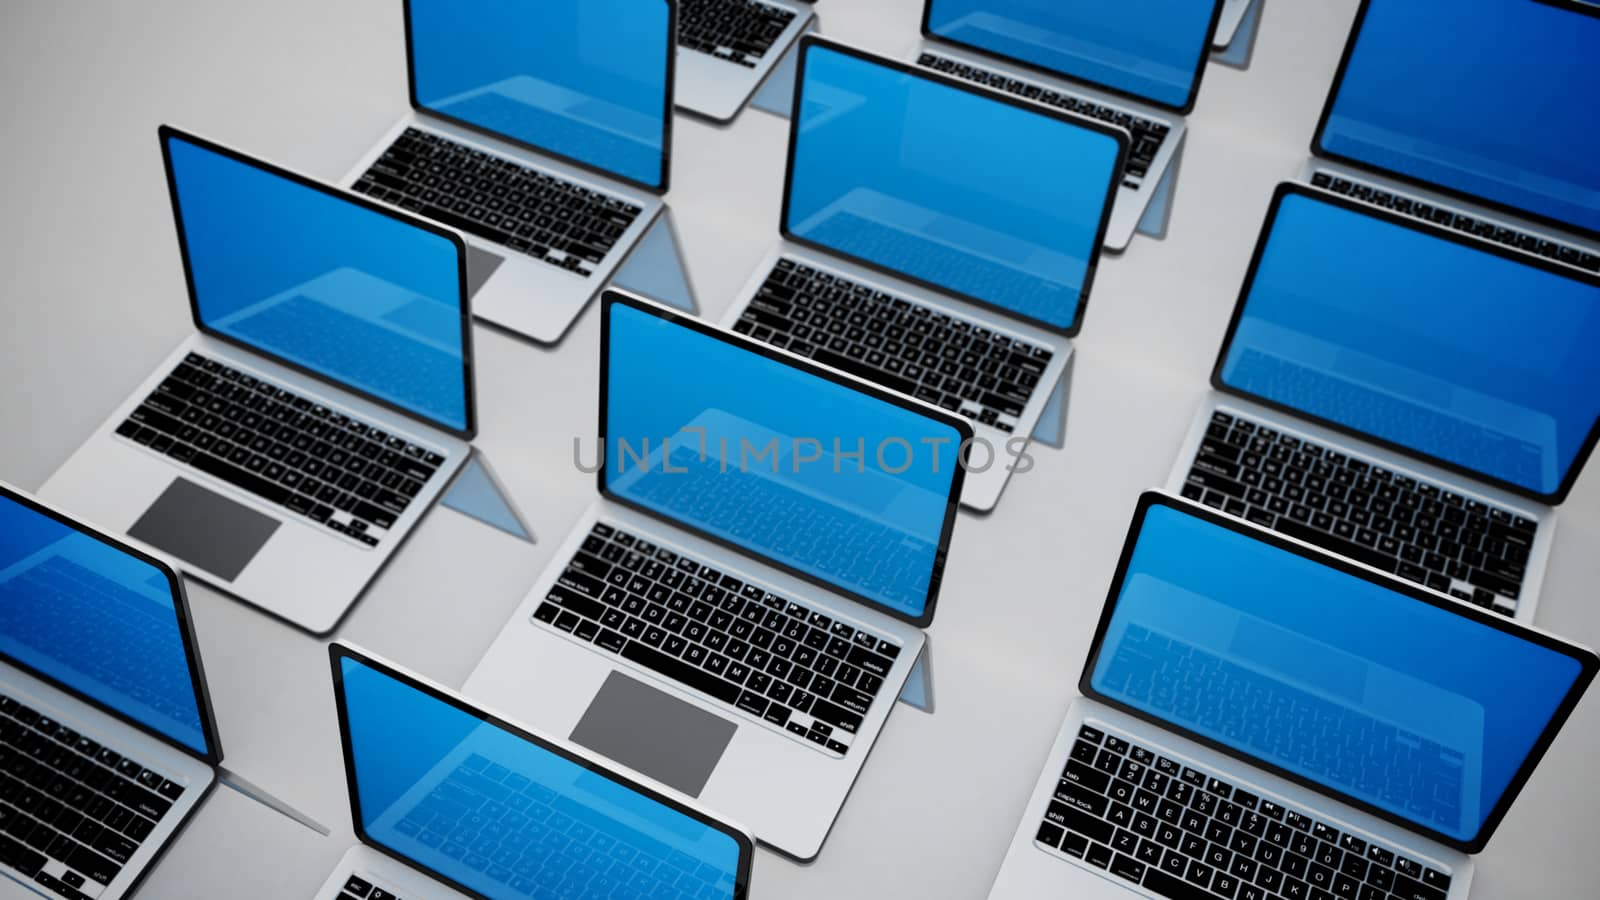 3d image of a lot of laptops in a rows on grey background.